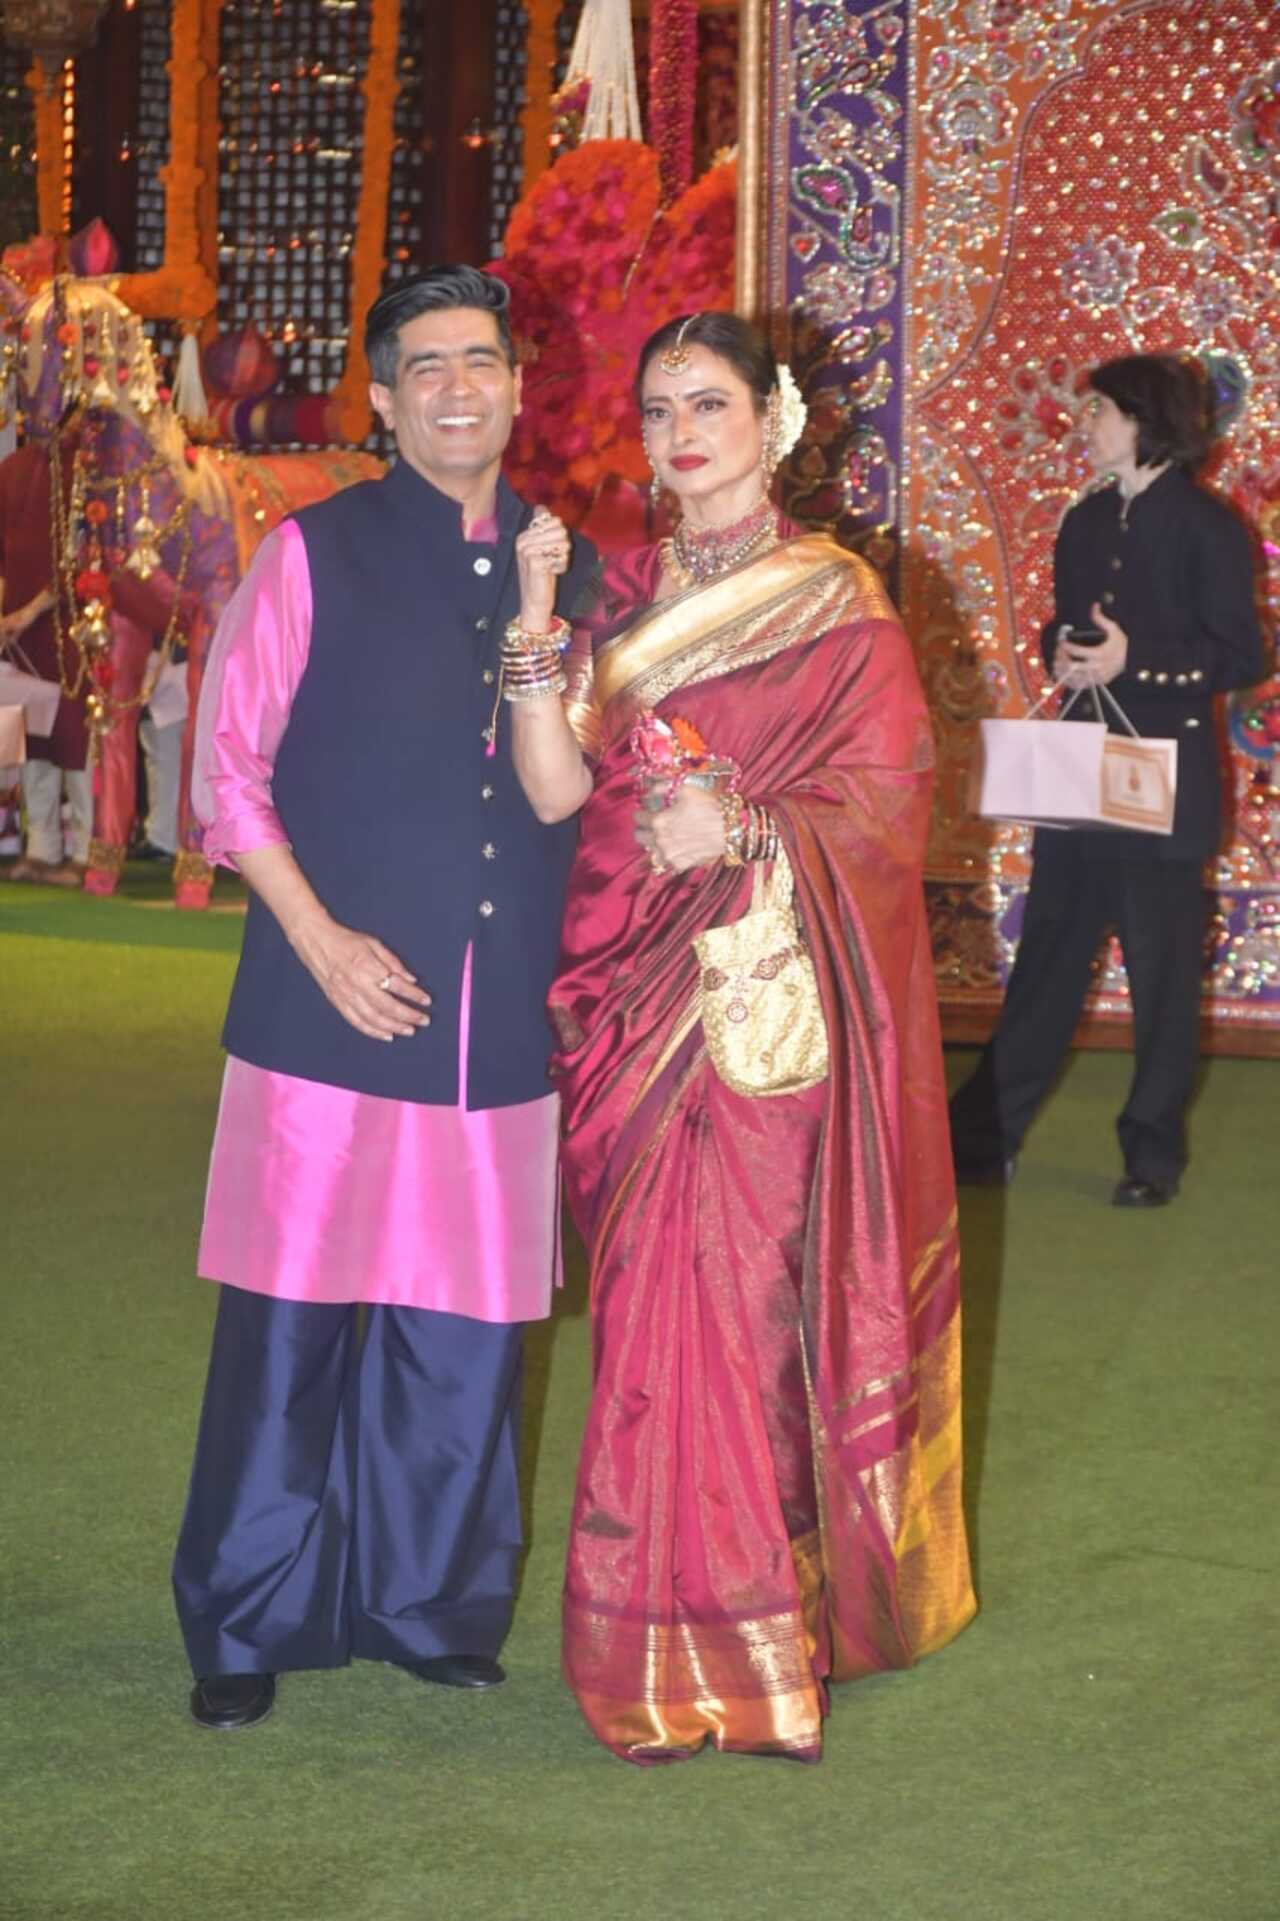 Manish Malhotra and Rekha posed for pictures together. The diva looked stunning in a Kanjivaram saree